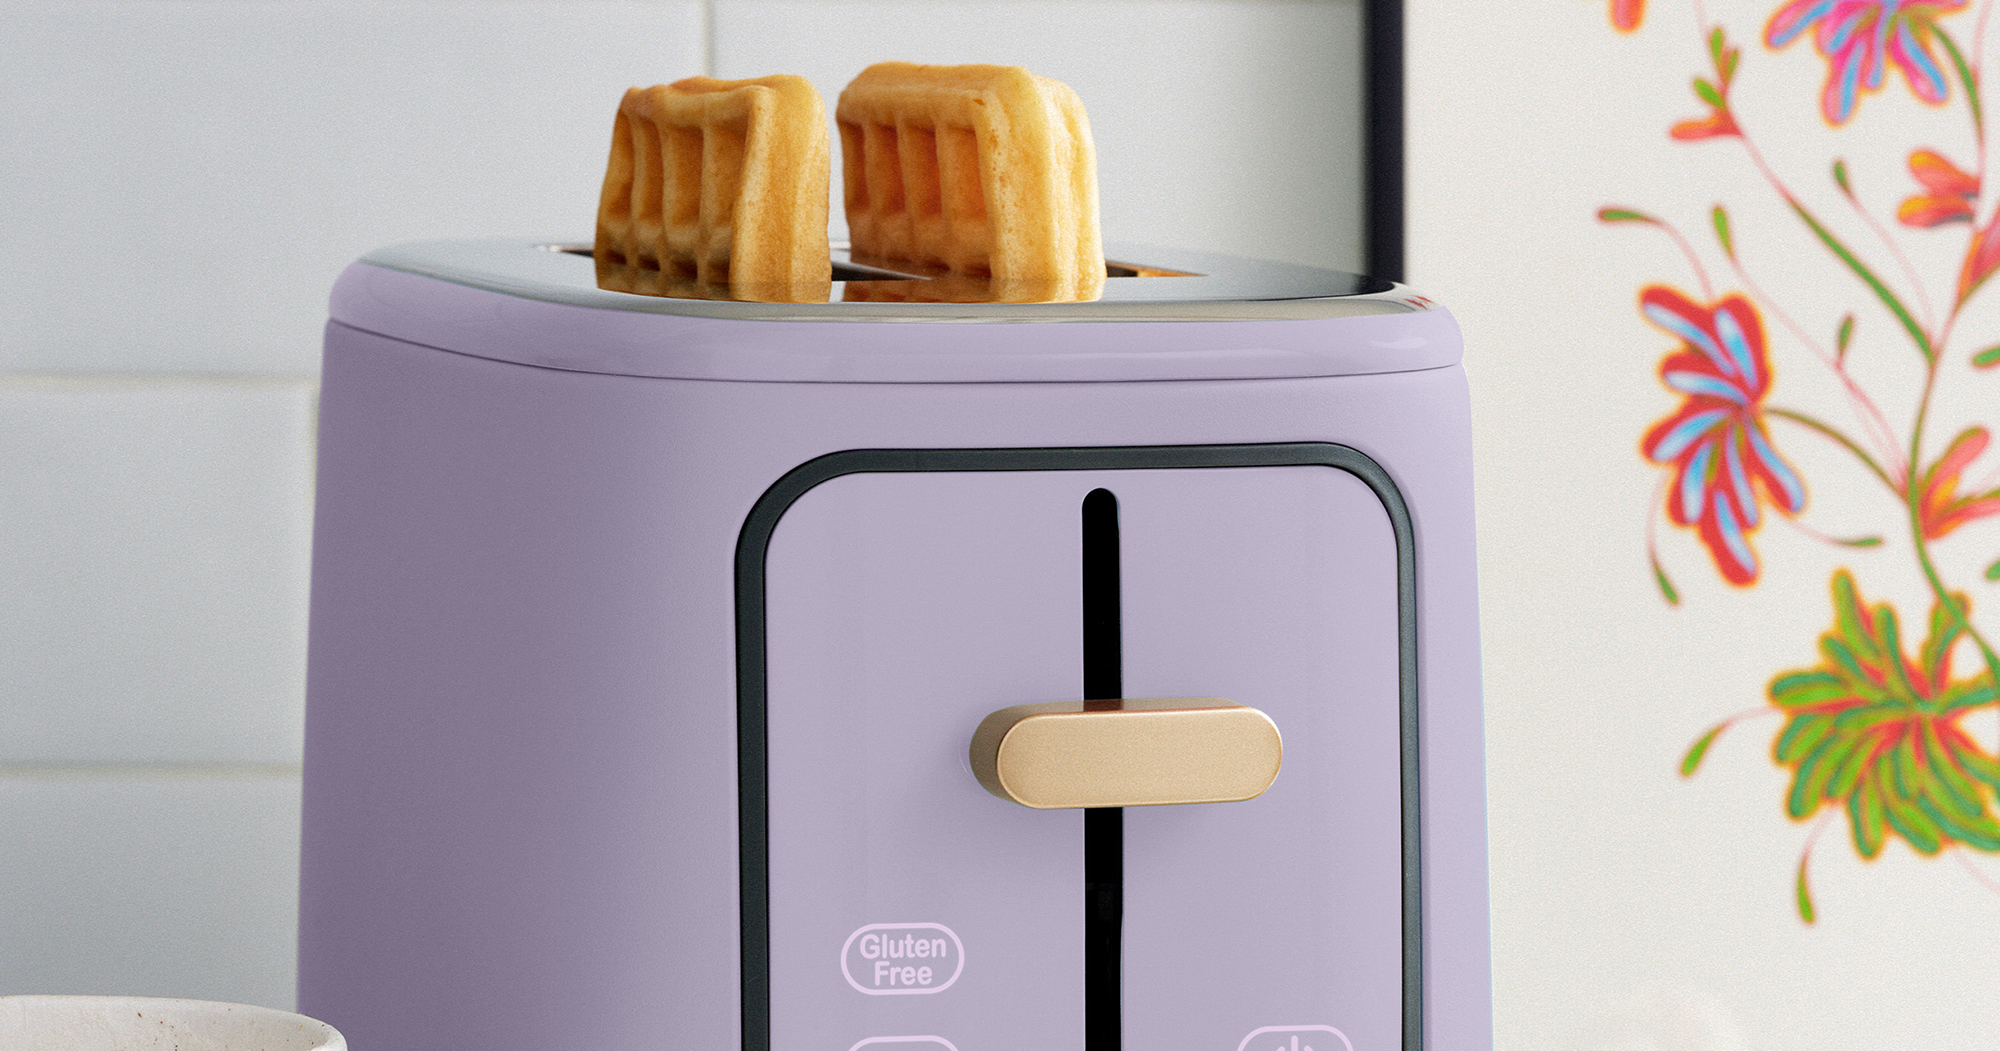 Beautiful 1.5 qt Ice Cream Maker with Touch Activated Display, Lavender by Drew Barrymore